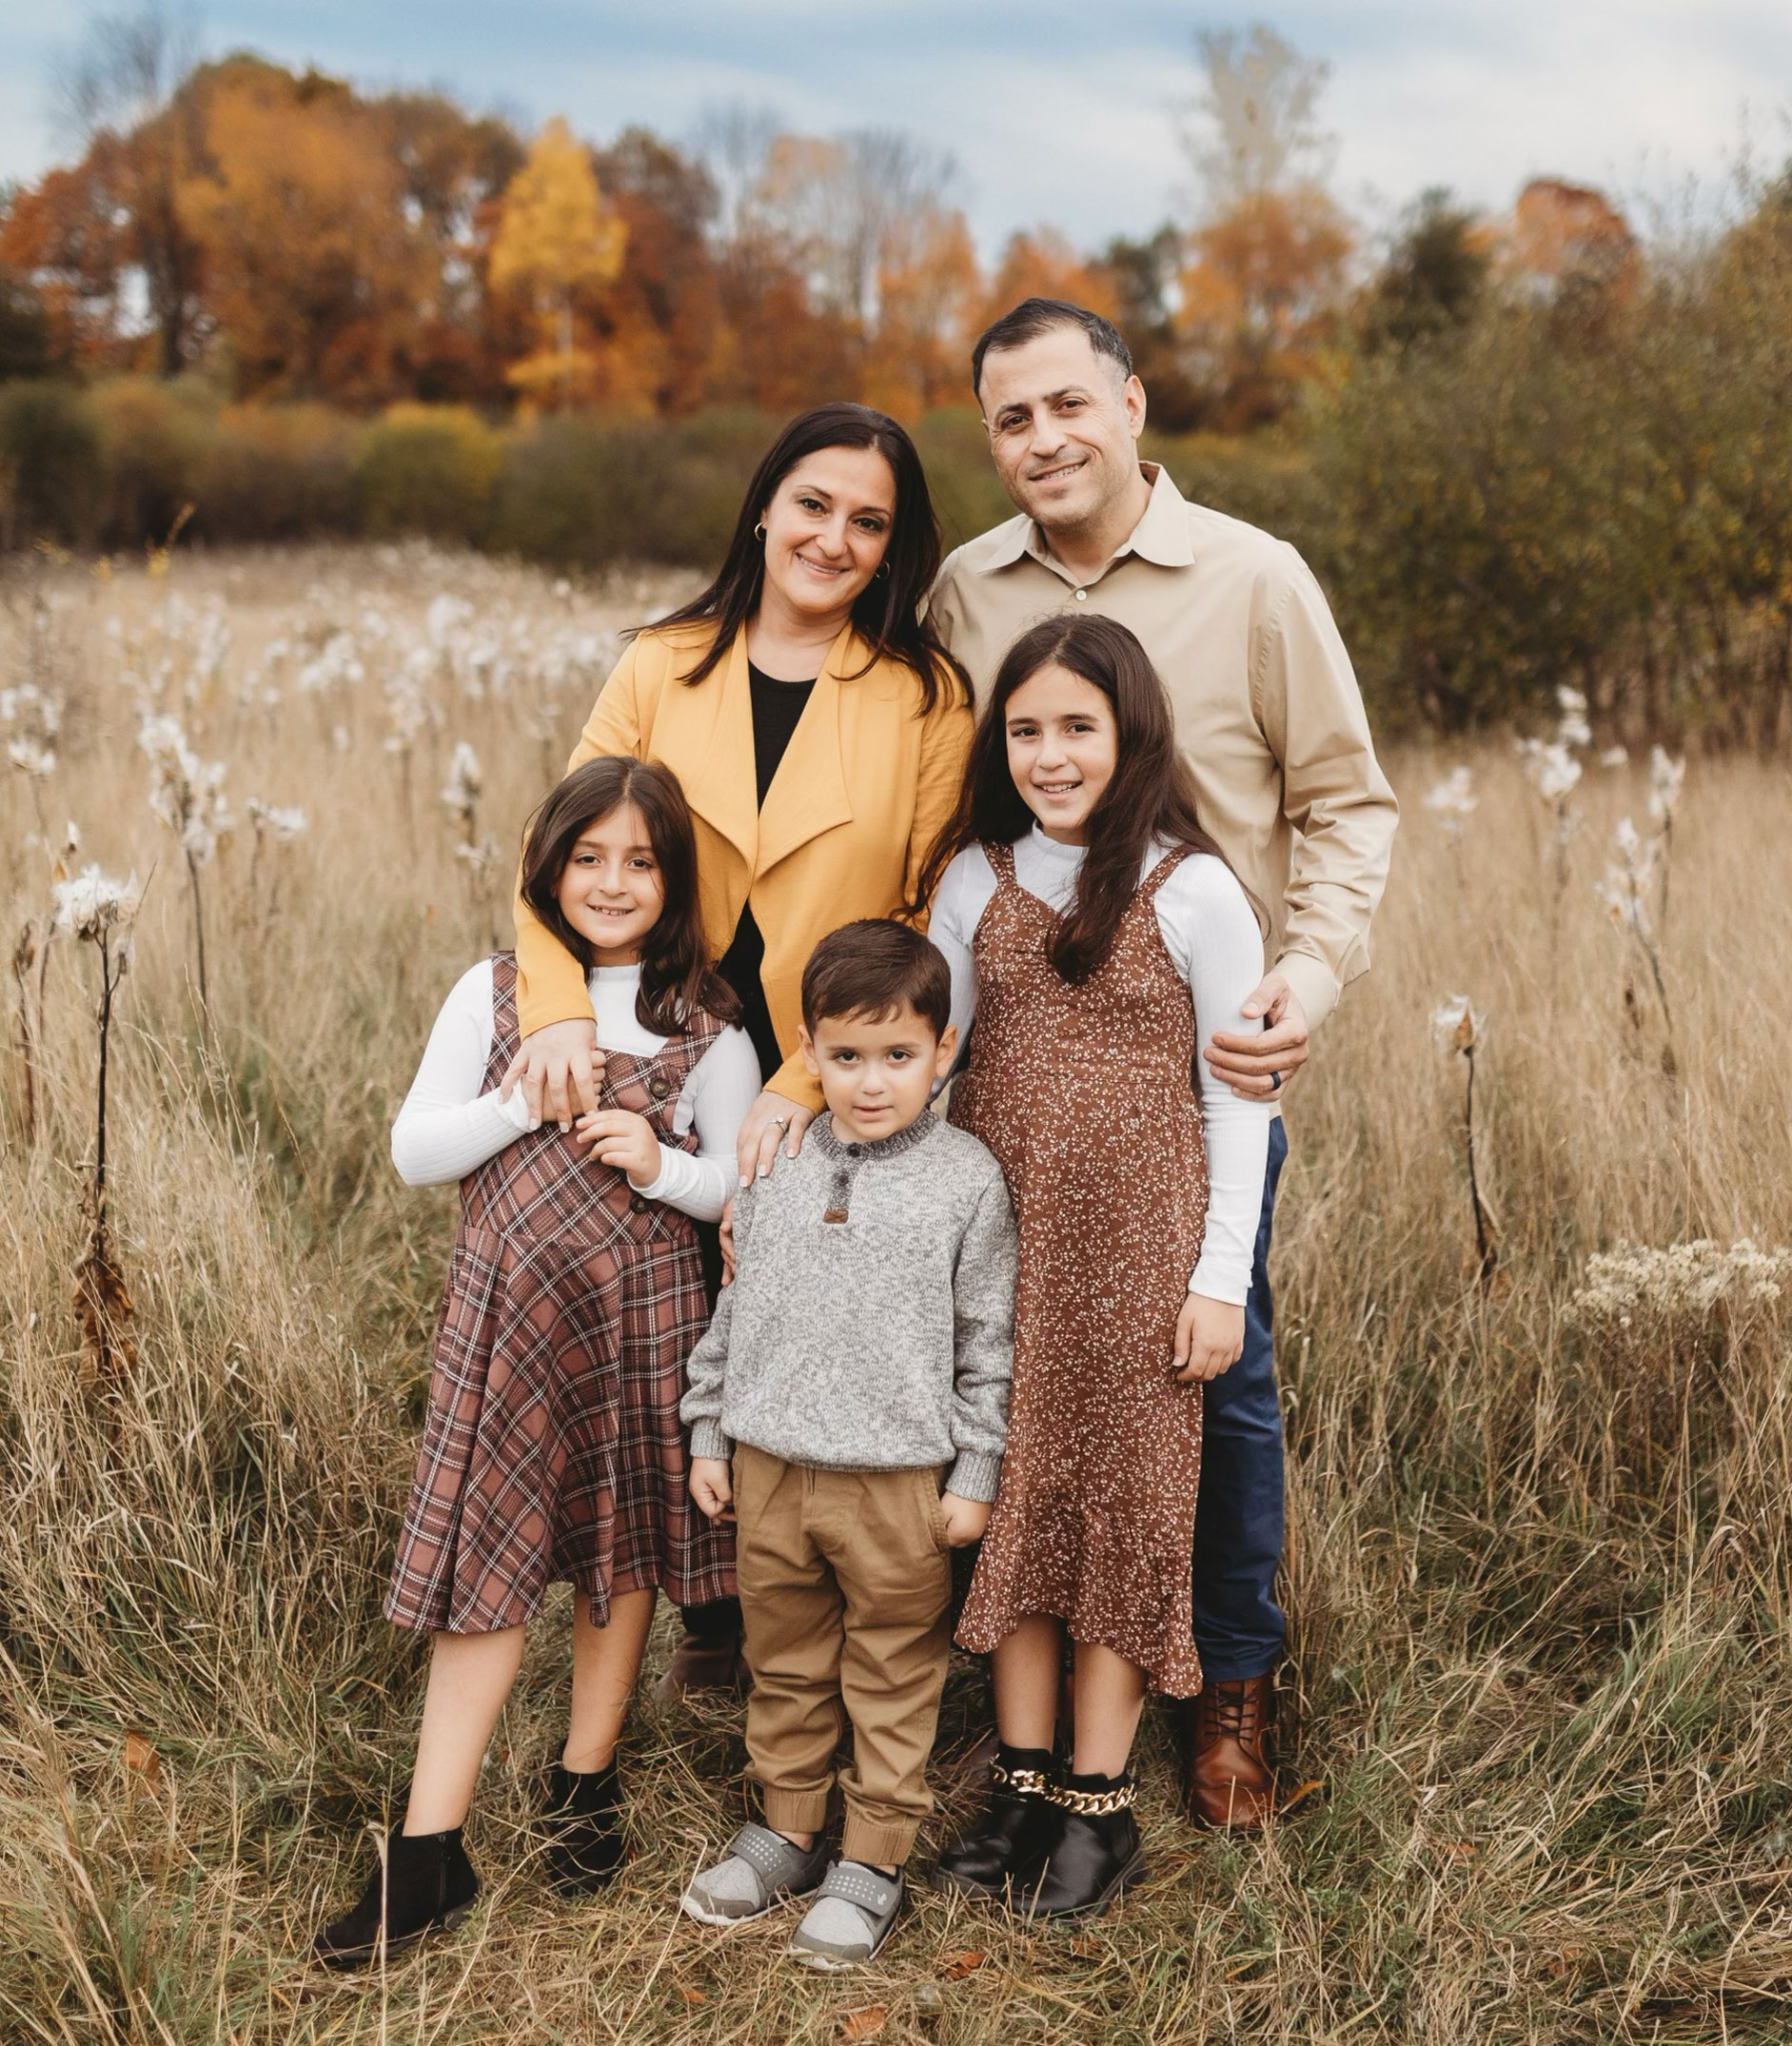 Dr. Amanda Yousif, DDS and her family in Warren, MI